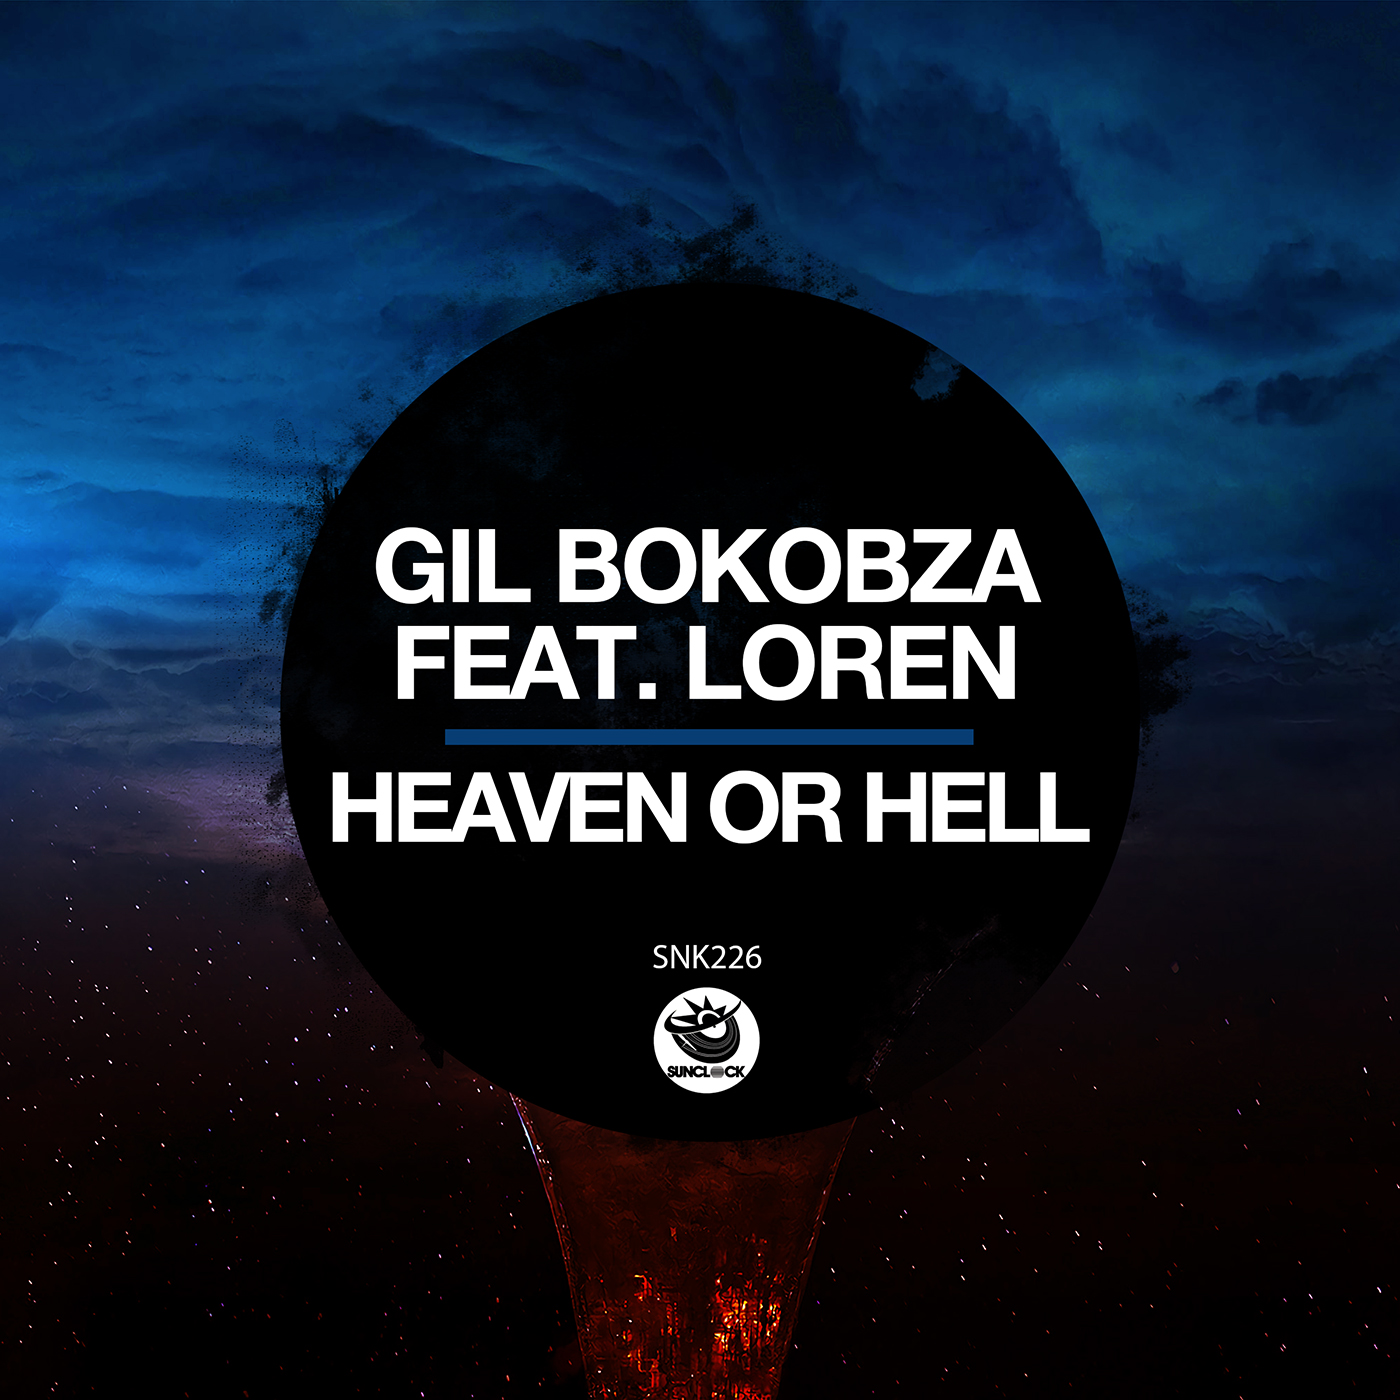 Gil Bokobza feat. Loren - Heaven or Hell - SNK226 Cover